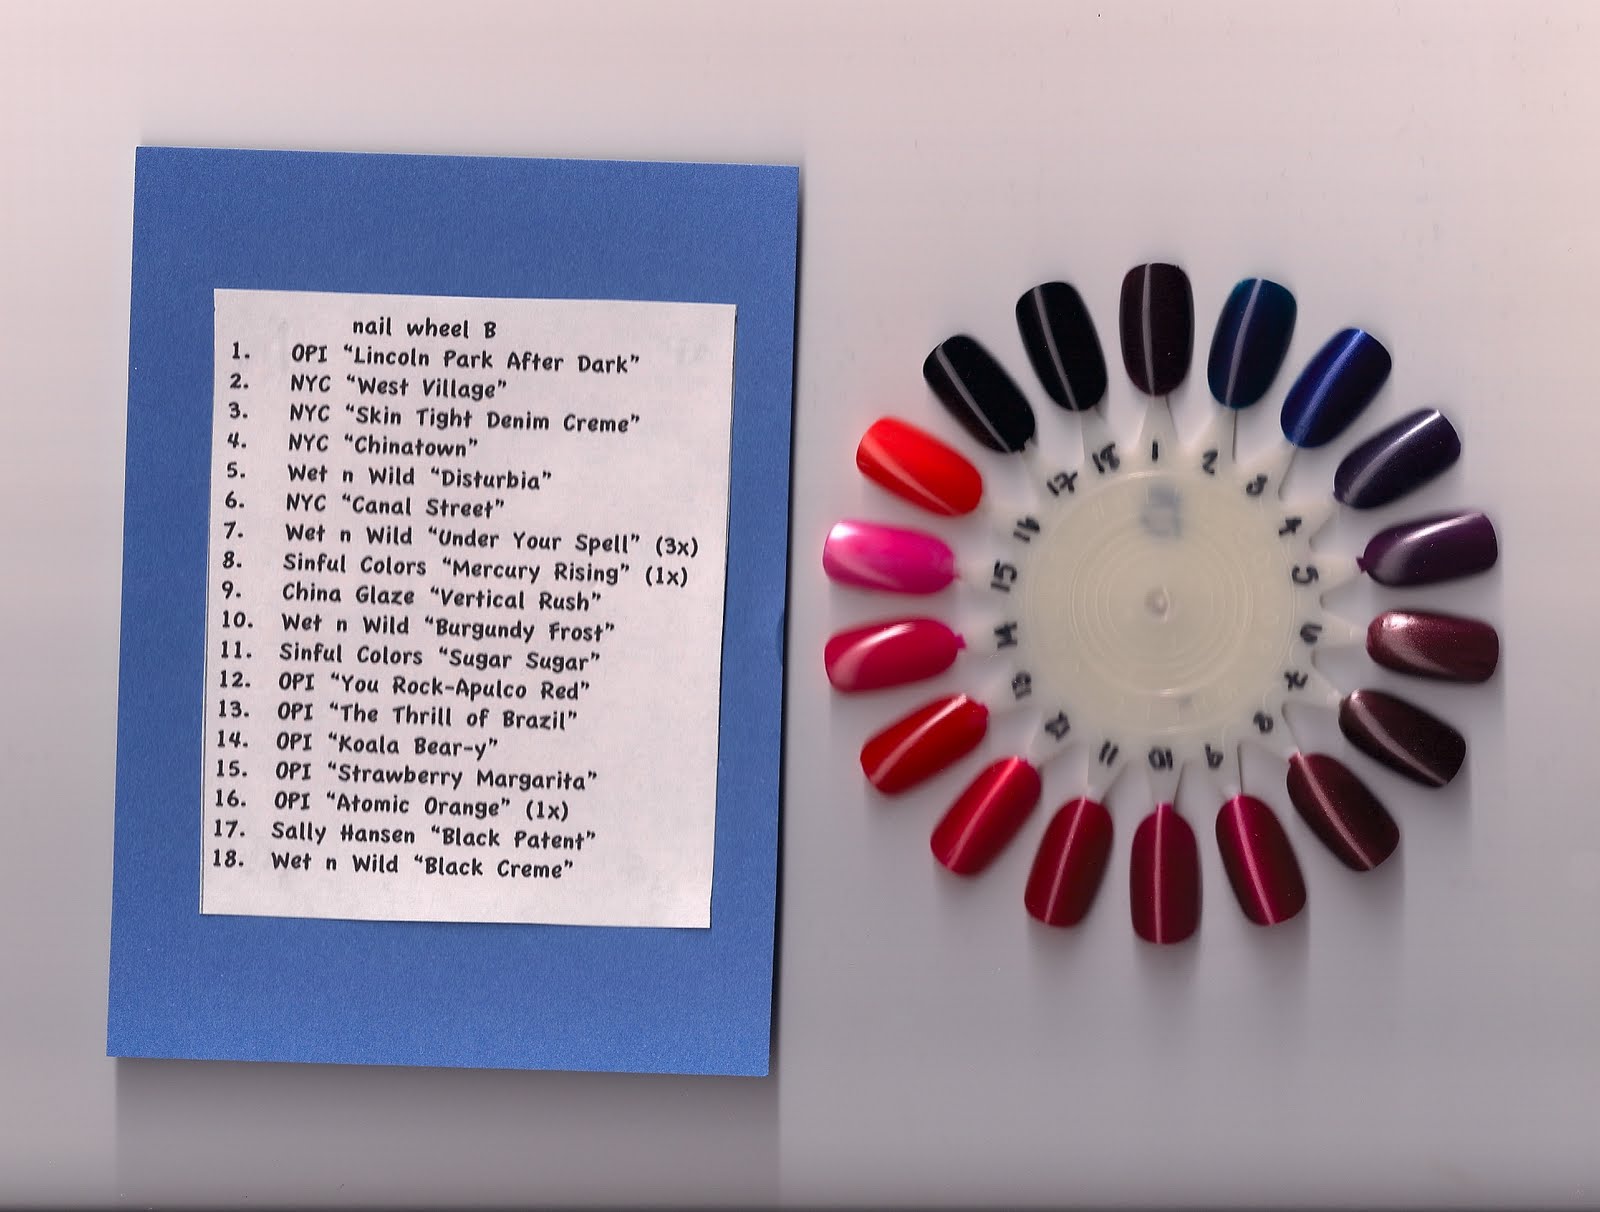 1. Color Wheel for Nail Polish: The Ultimate Guide - wide 4